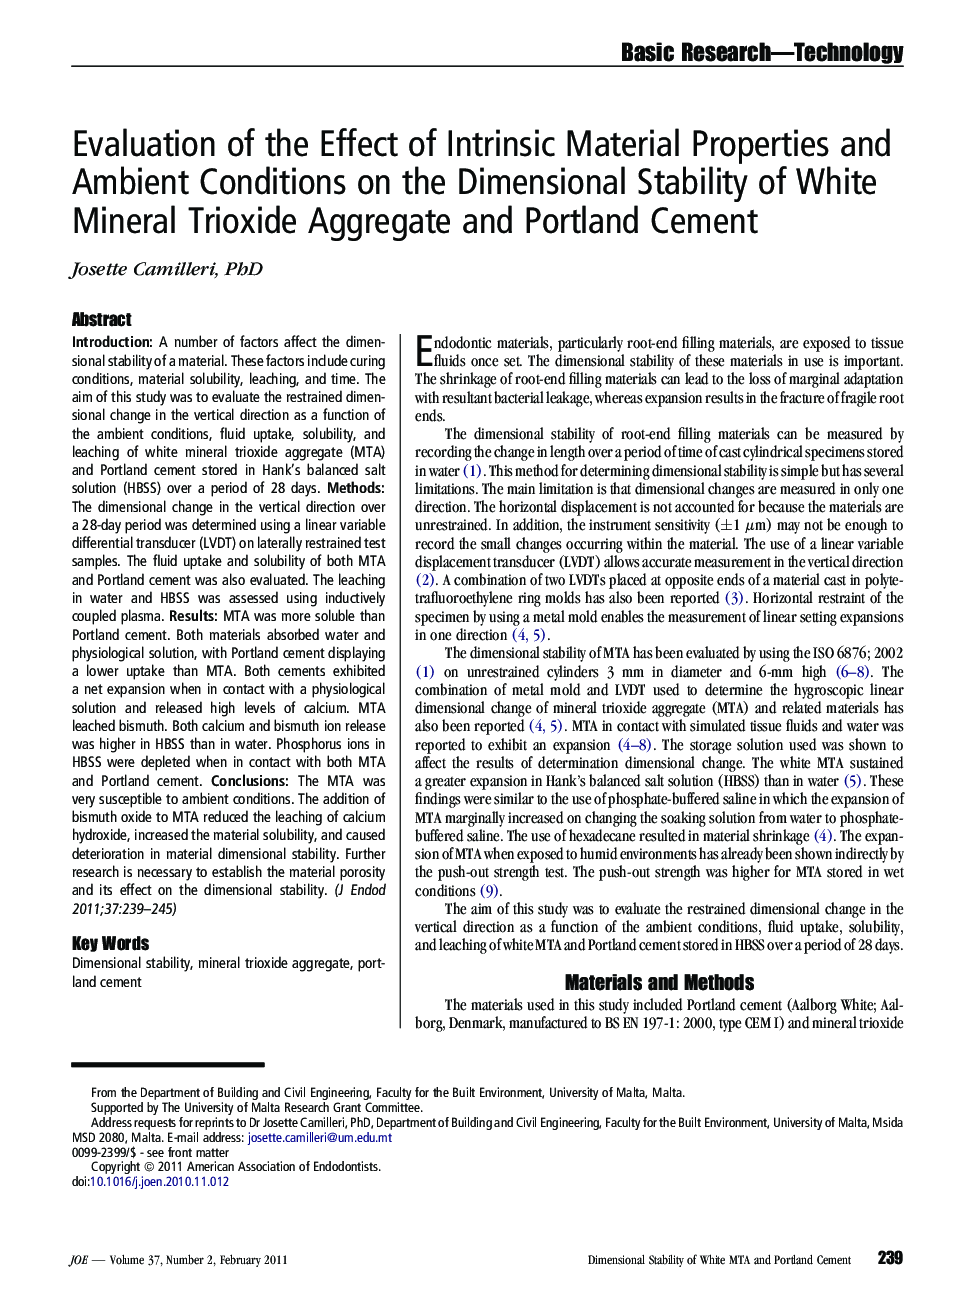 Evaluation of the Effect of Intrinsic Material Properties and Ambient Conditions on the Dimensional Stability of White Mineral Trioxide Aggregate and Portland Cement